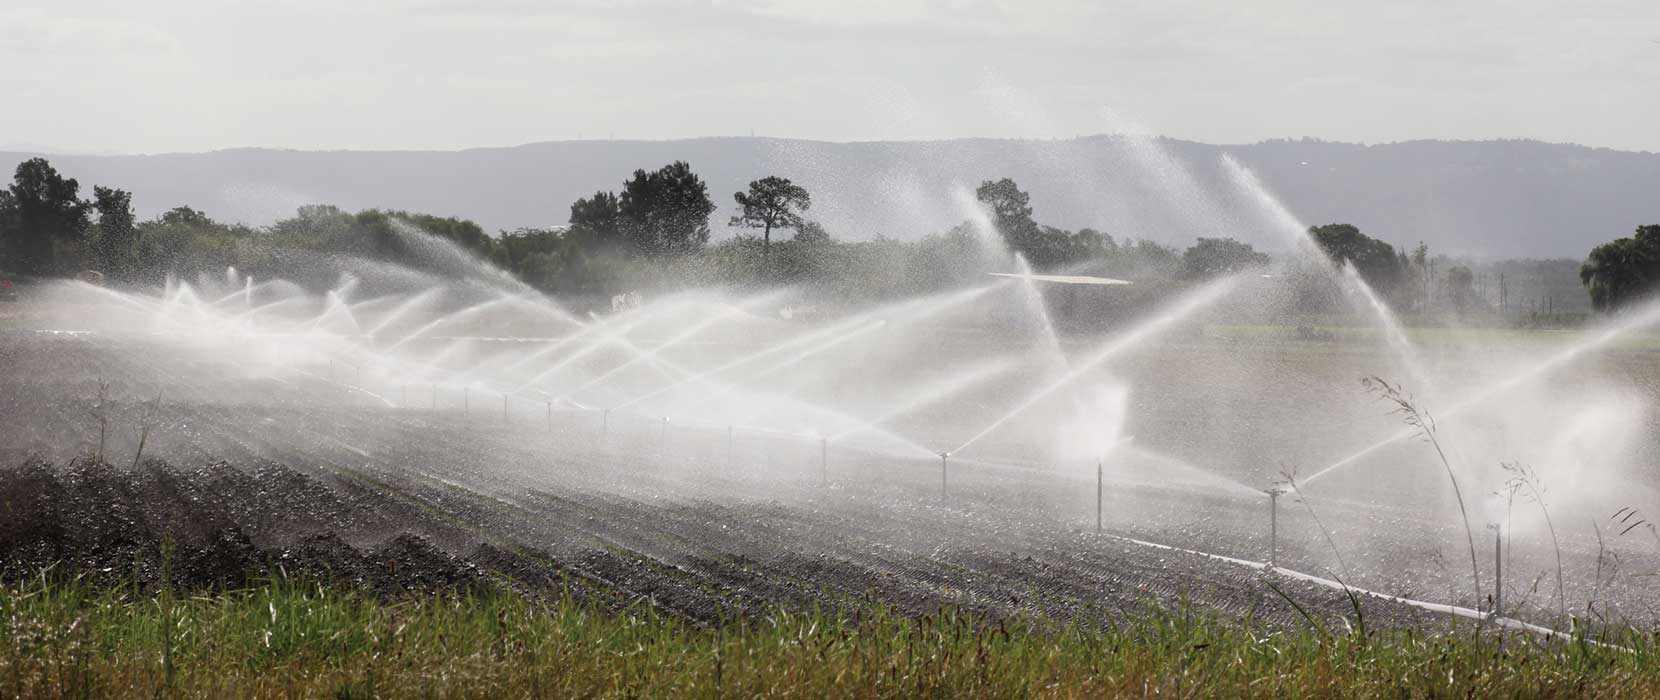 Irrigation pipes spraying water across a pasture.